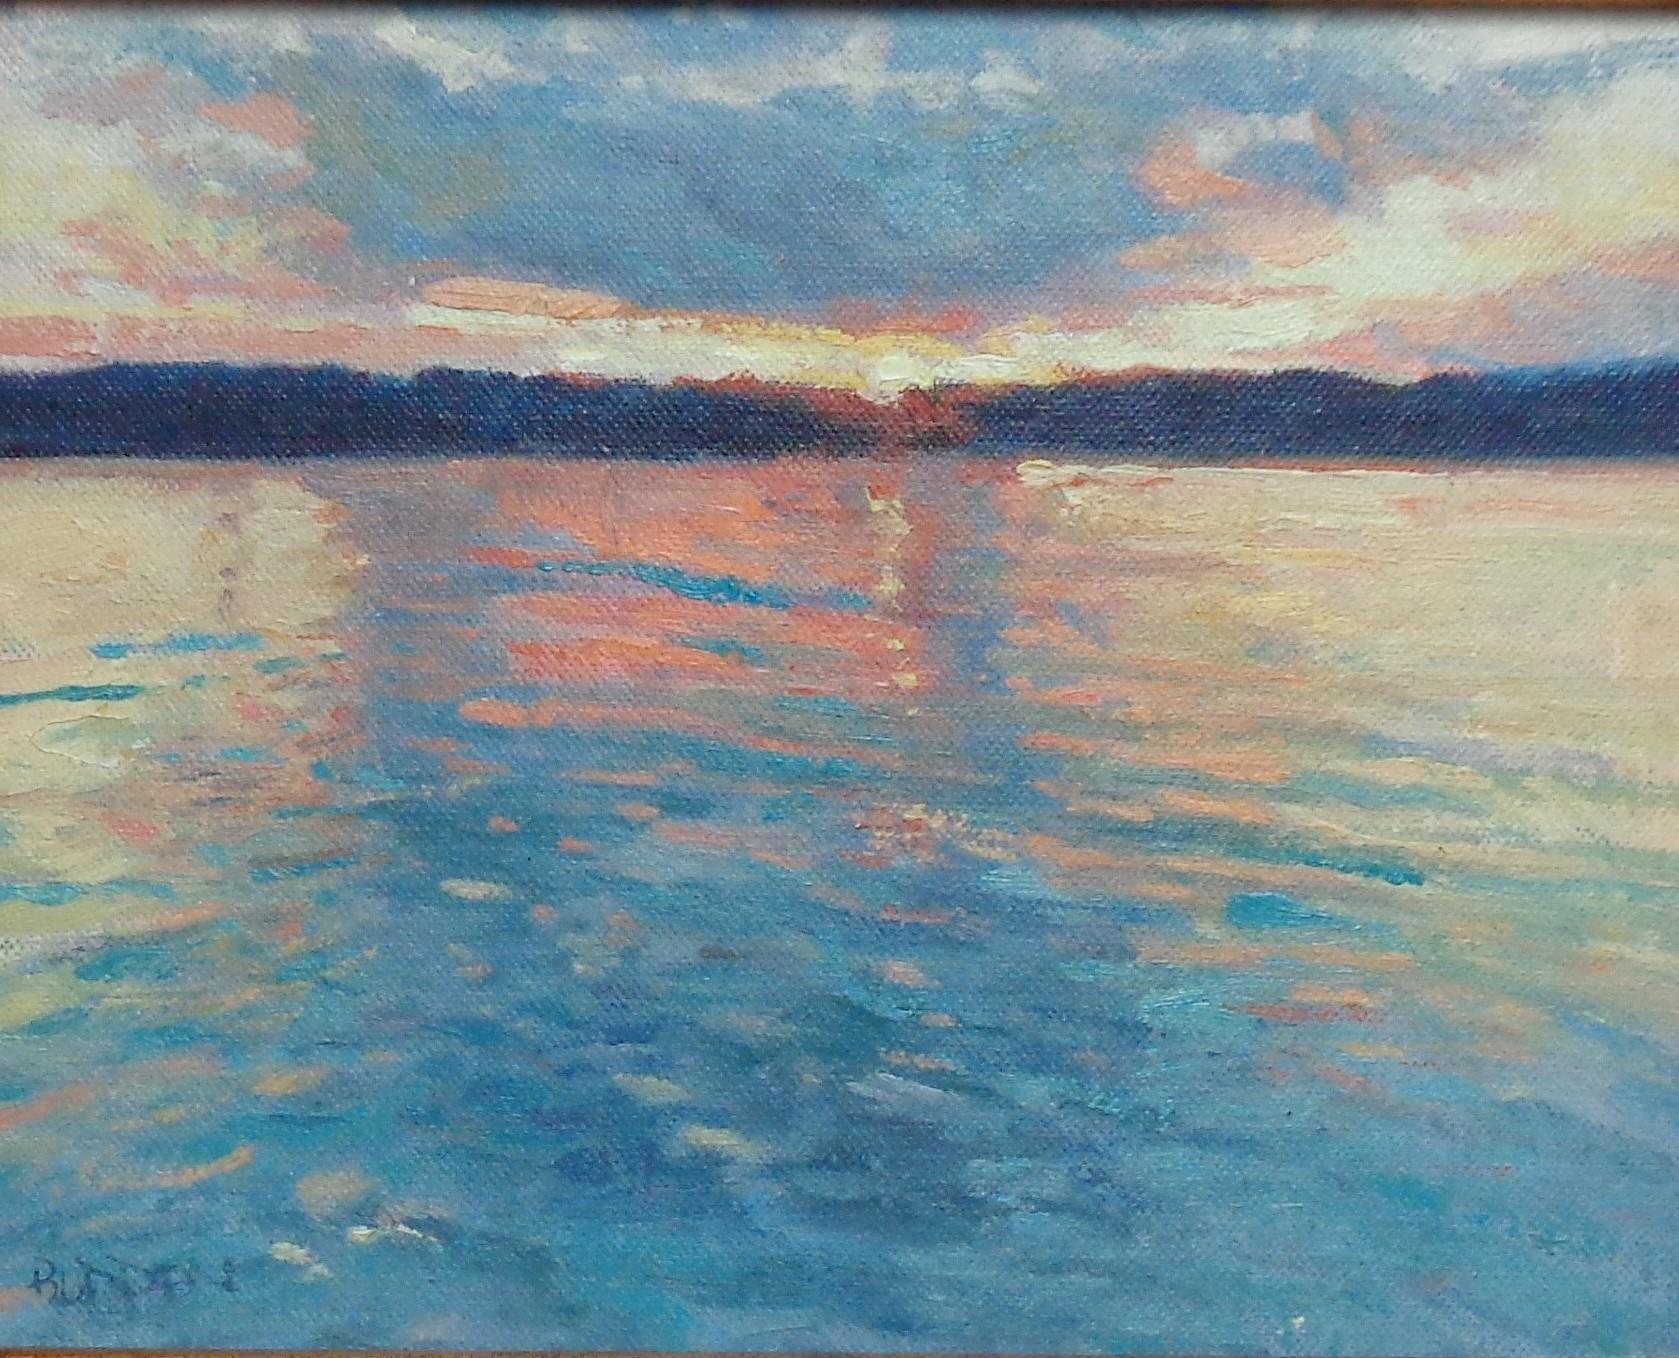 Sunrise Reflections is an oil painting on canvas by award winning contemporary artist Michael Budden that showcases a study of a beautifully colored sunrise and soft reflections in the water. The image measure 8 x 10 unframed. Painting is in